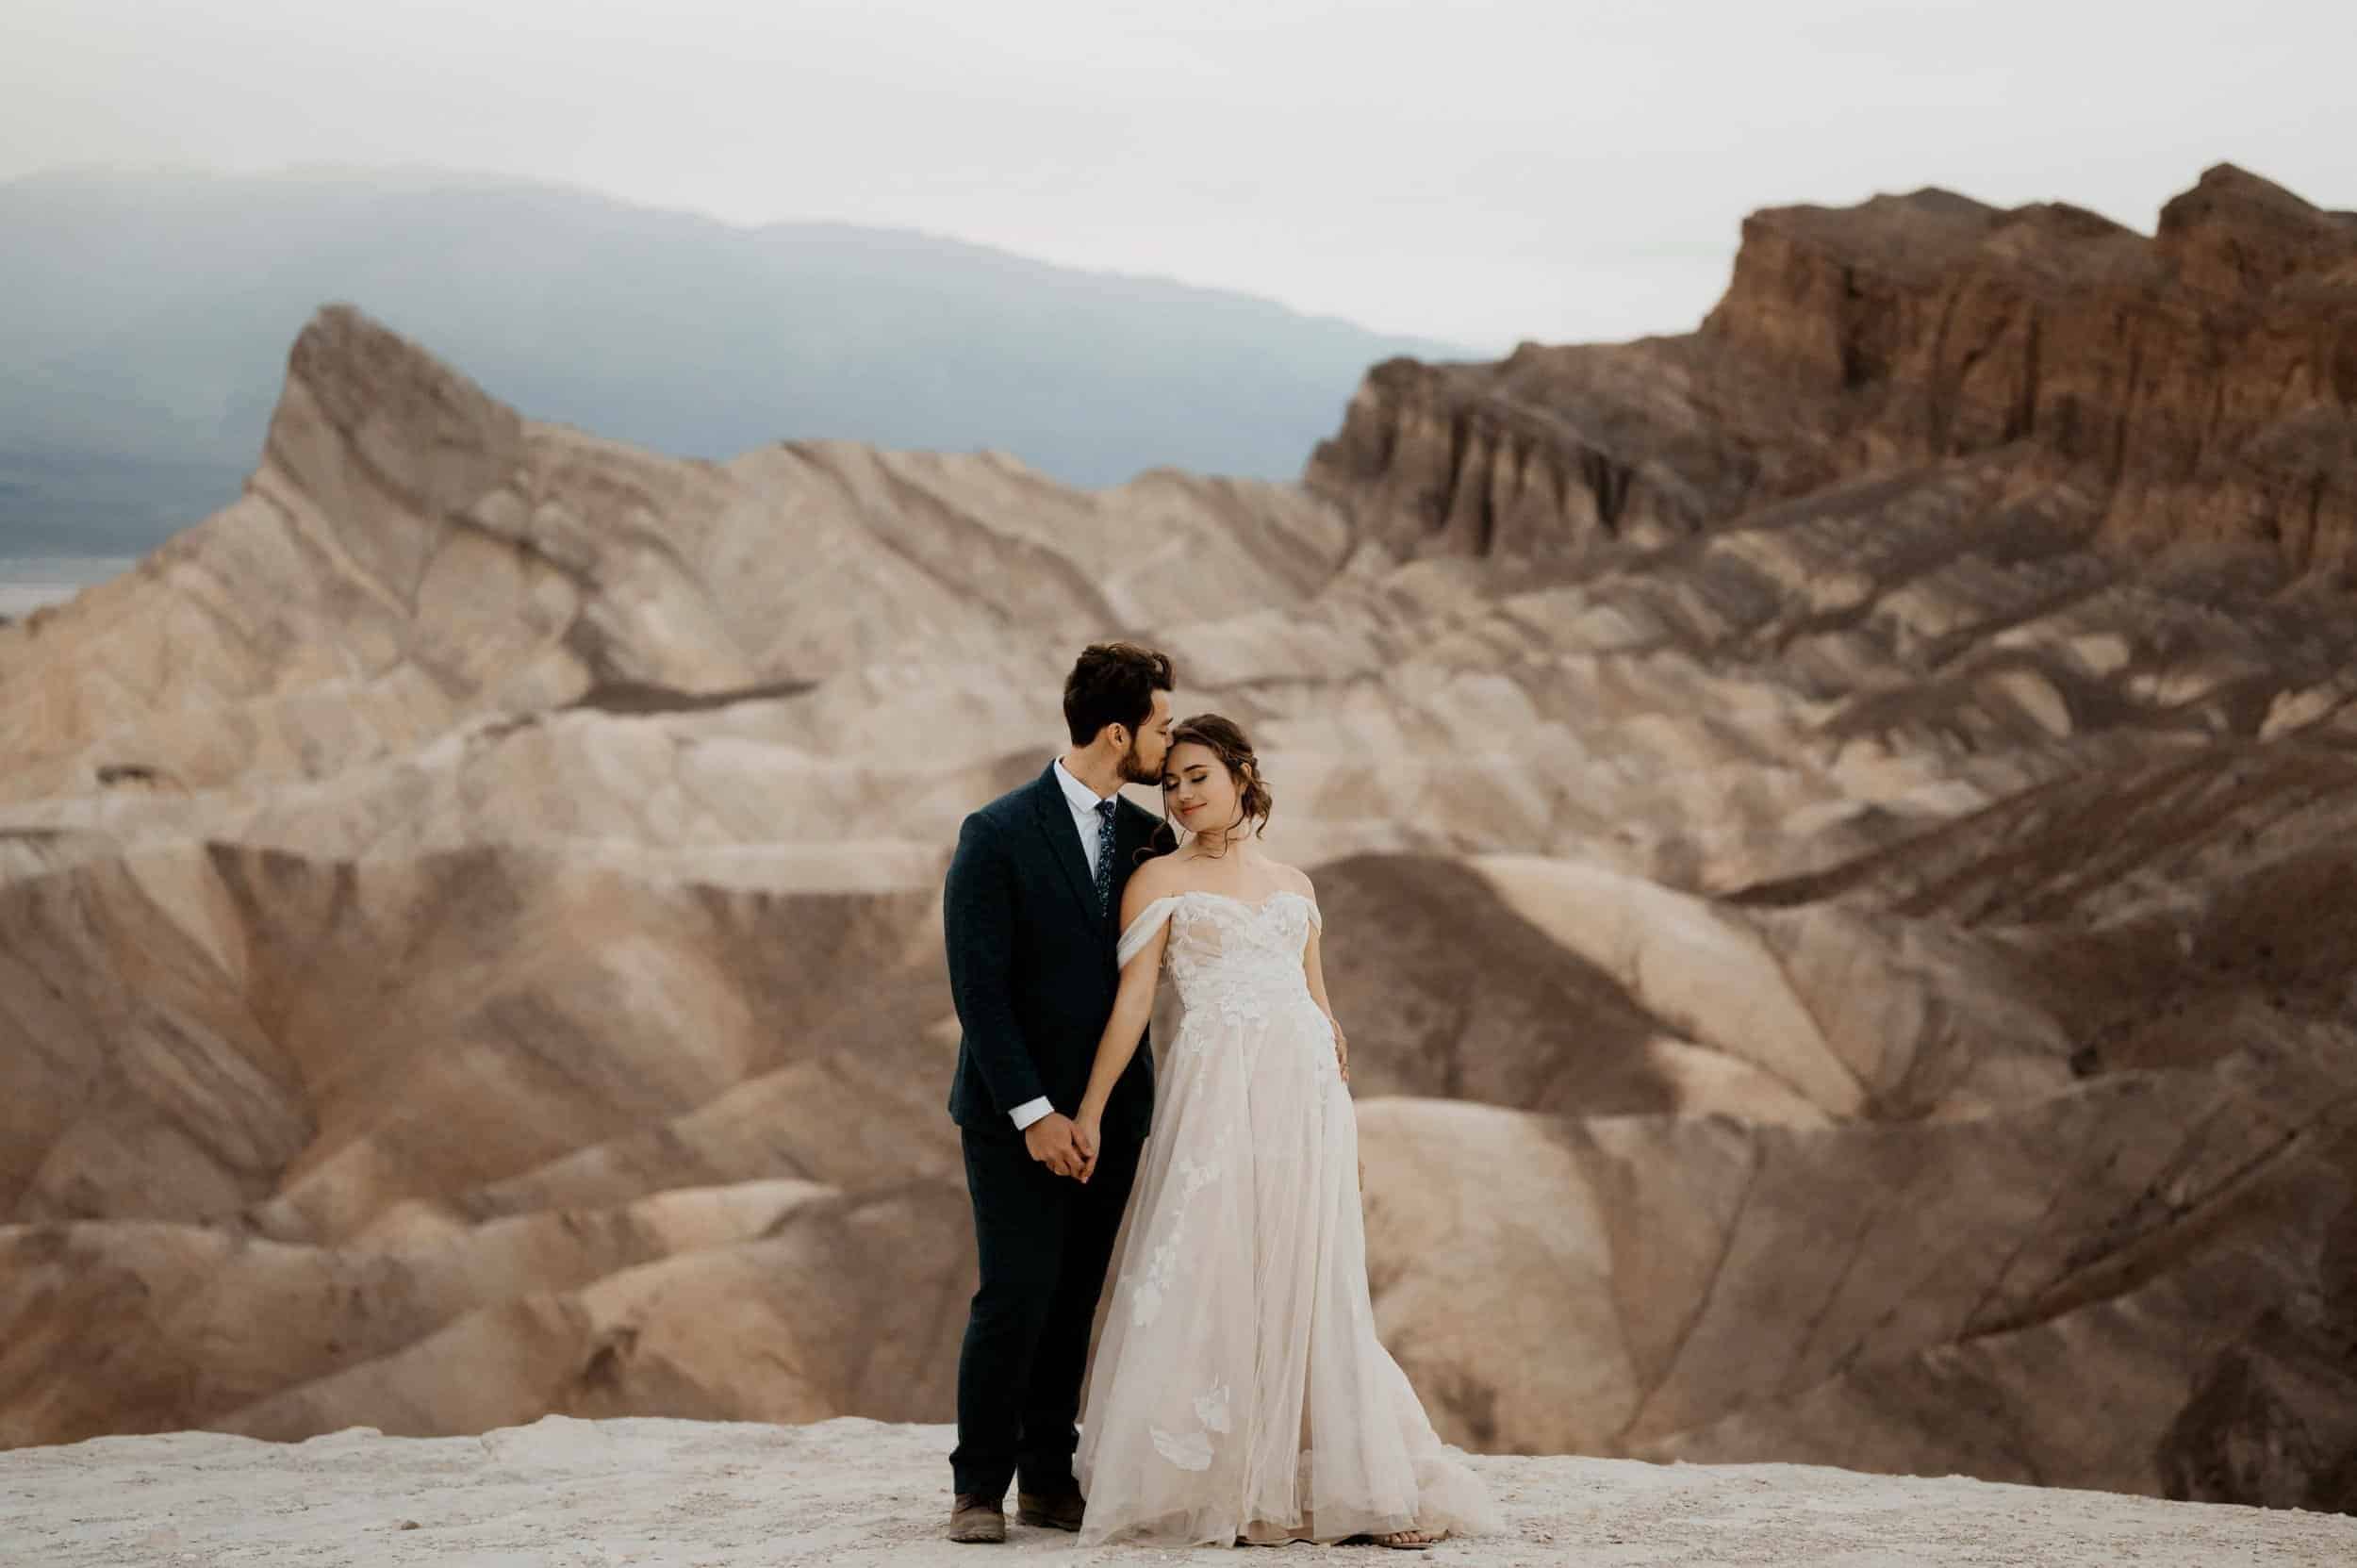 Couple eloping in Death Valley California